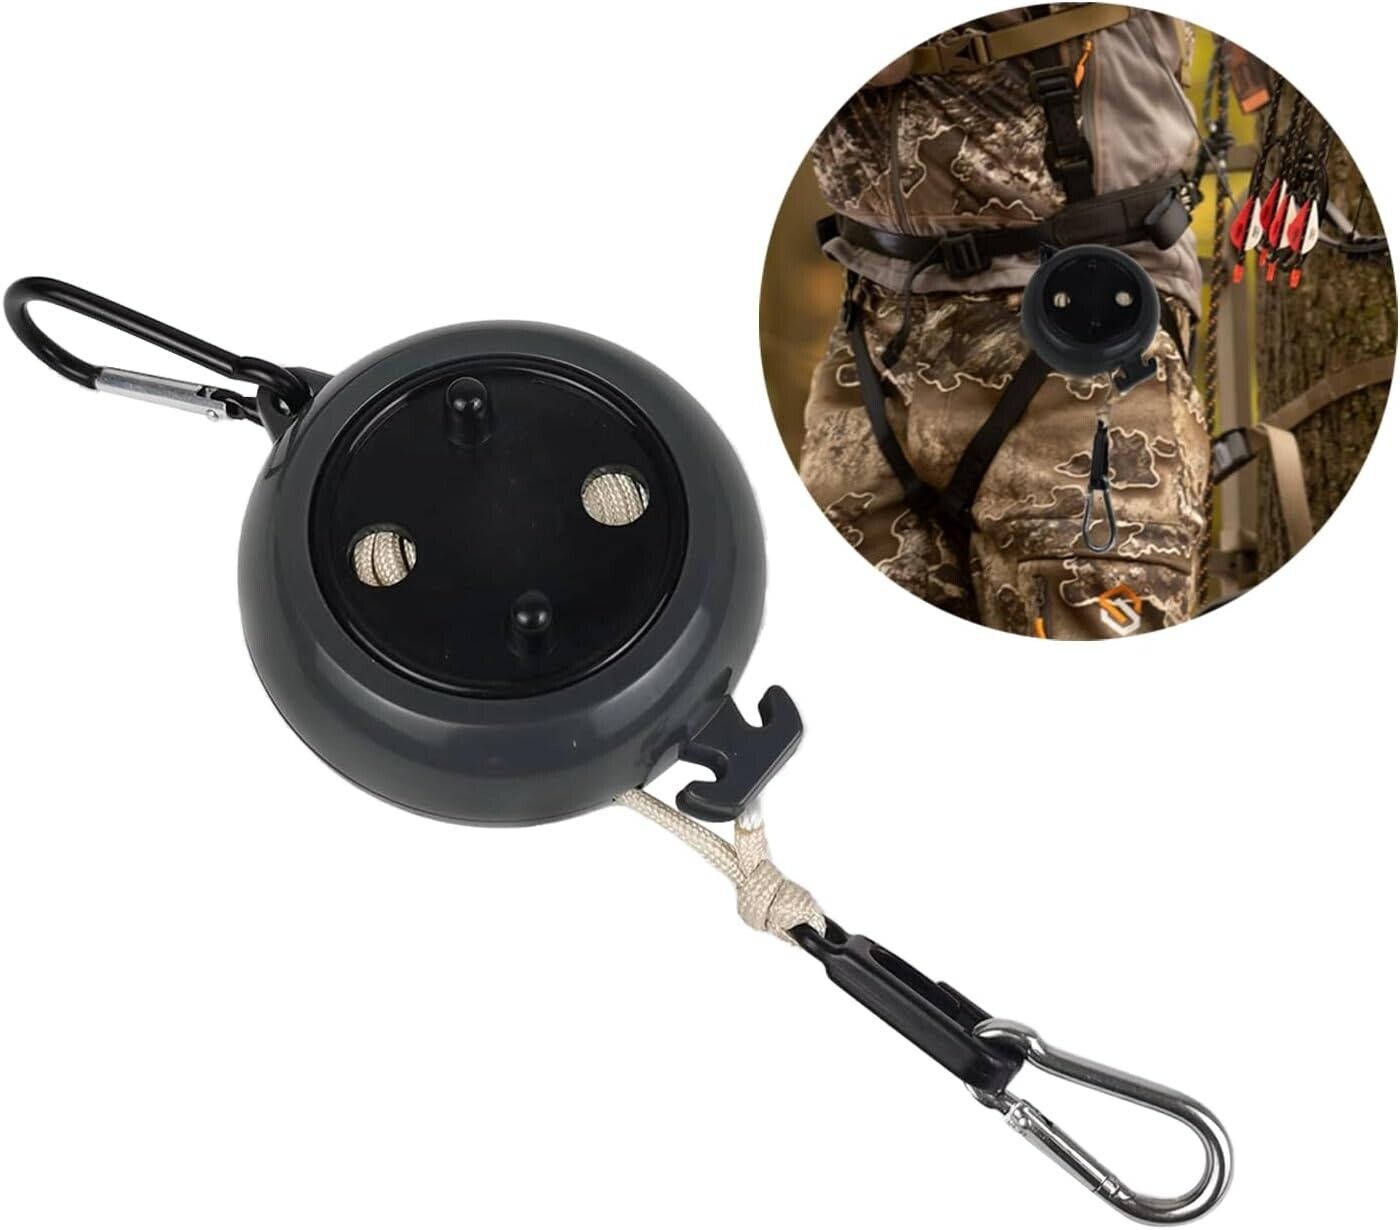  Retractable Tree Stand Hunting Hoist Rope for Bow | Archery Hanging Carrying 